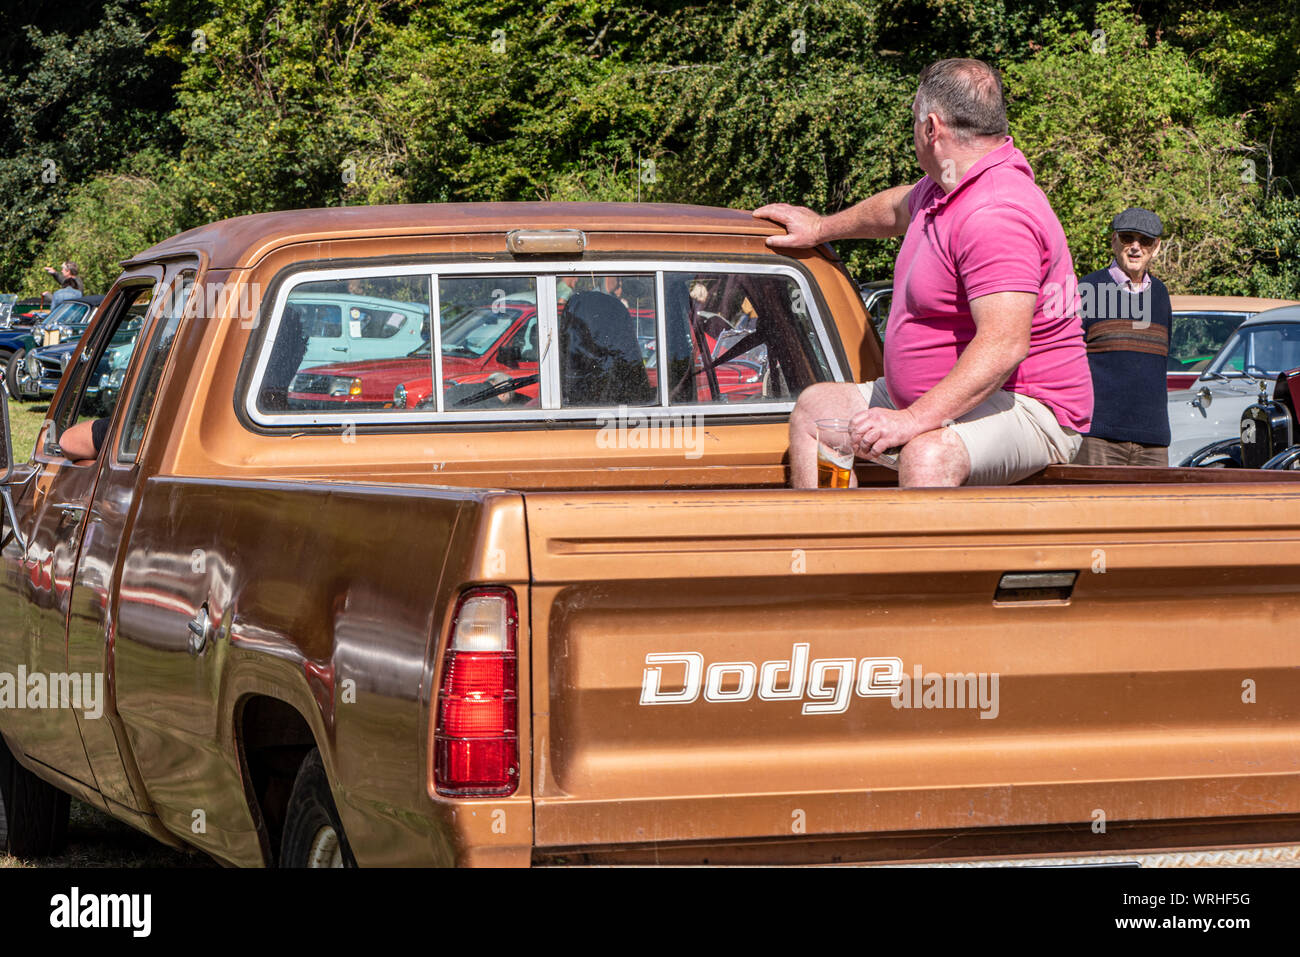 Man with beer glass riding in back of a Dodge pickup truck, at a classic car show, Hinton Arms, Cheriton, Hampshire, UK Stock Photo